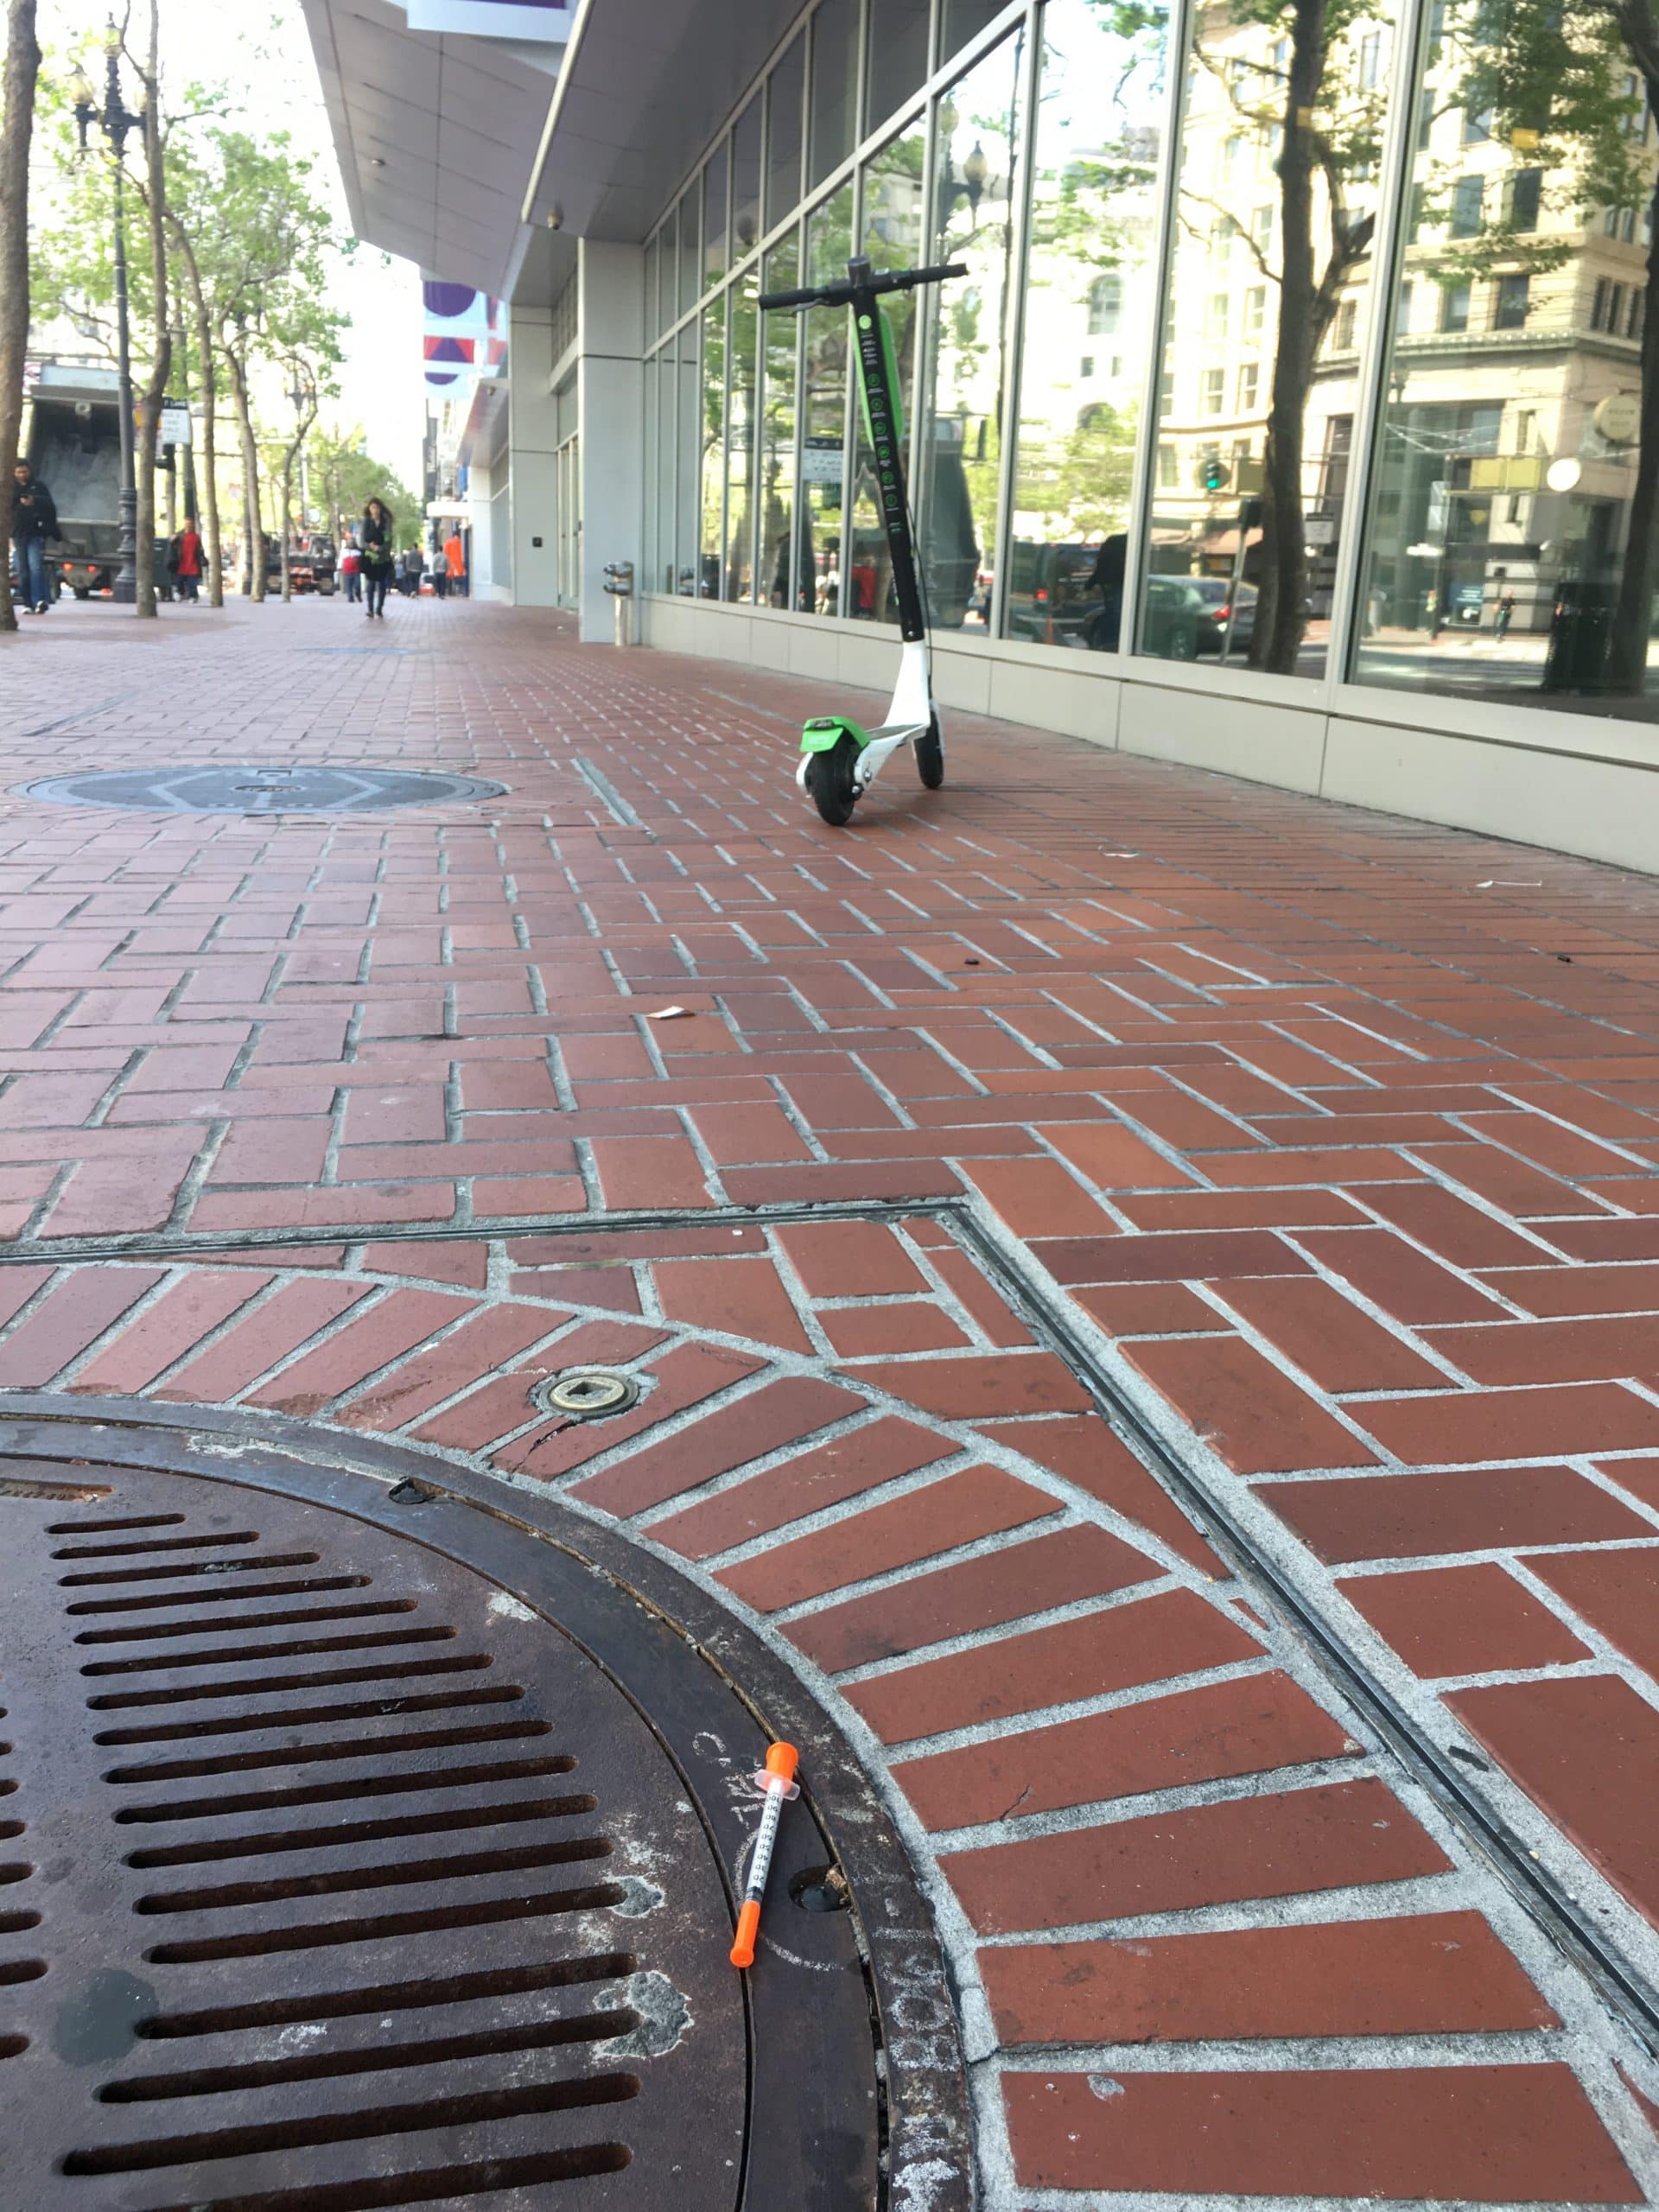 The Million Dollar Scar - Electric Scooters and Needles on Market Street